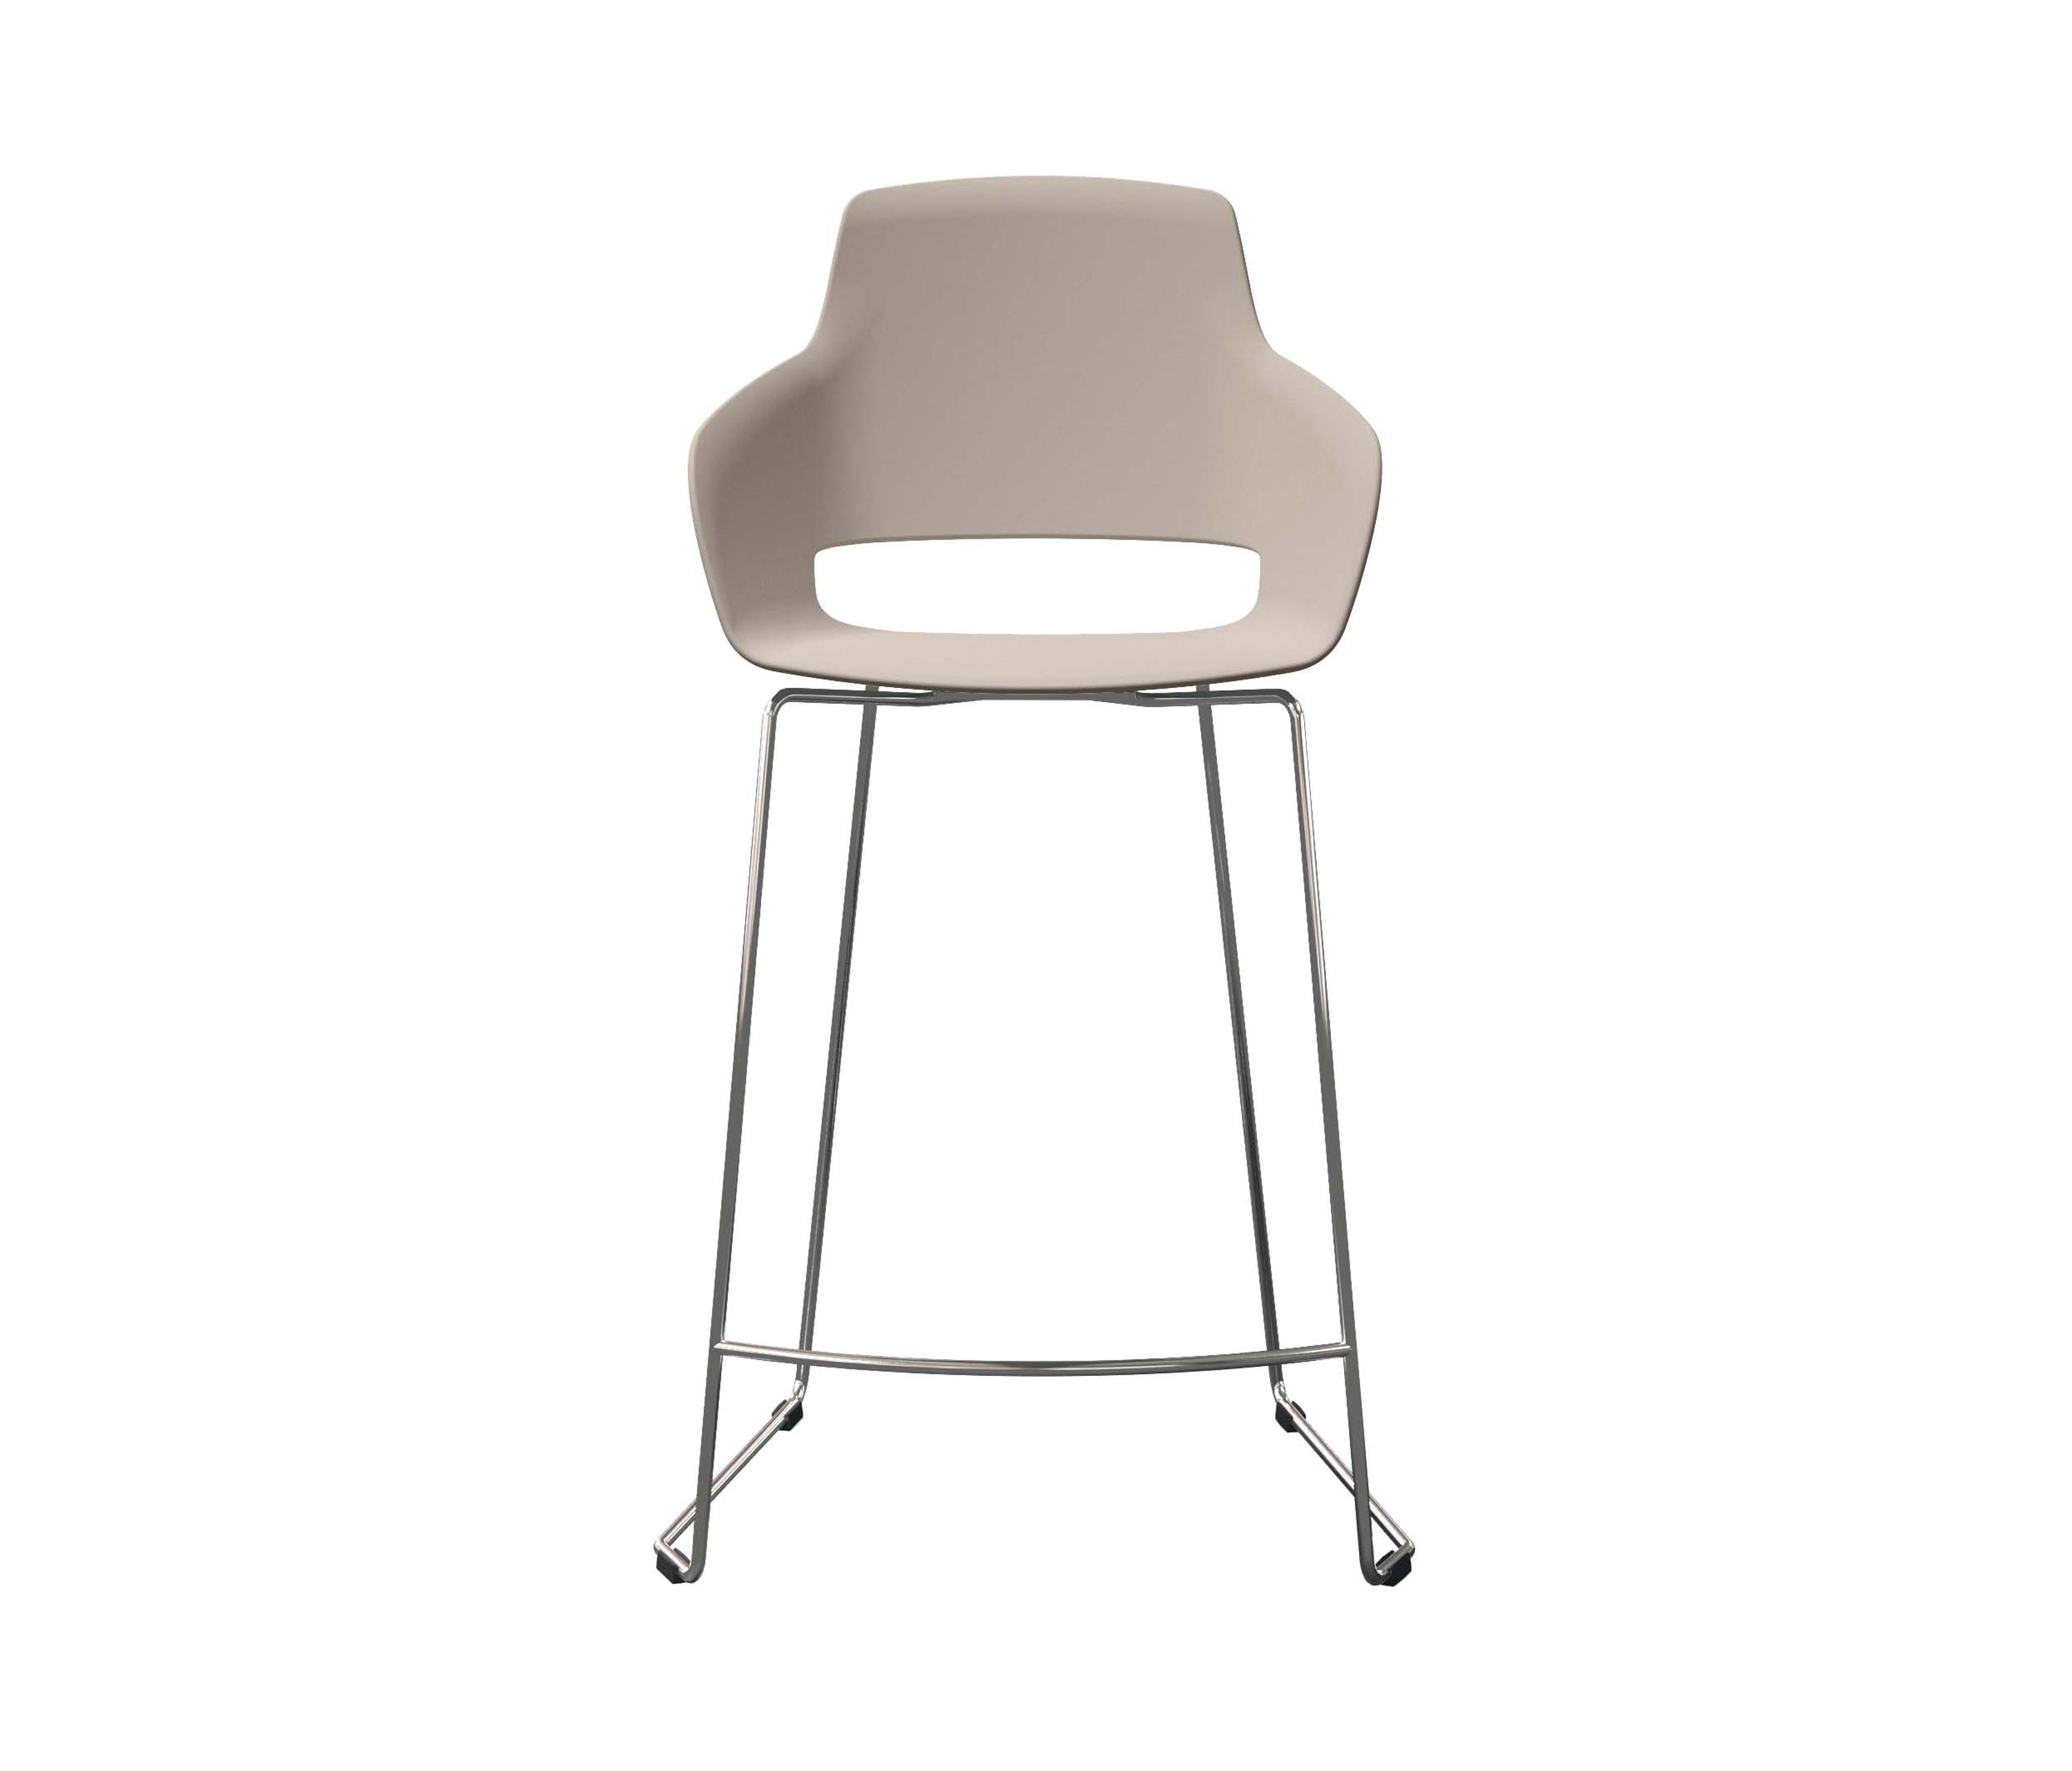 CAPTAIN PLAY - Bar stools from Jesse | Architonic